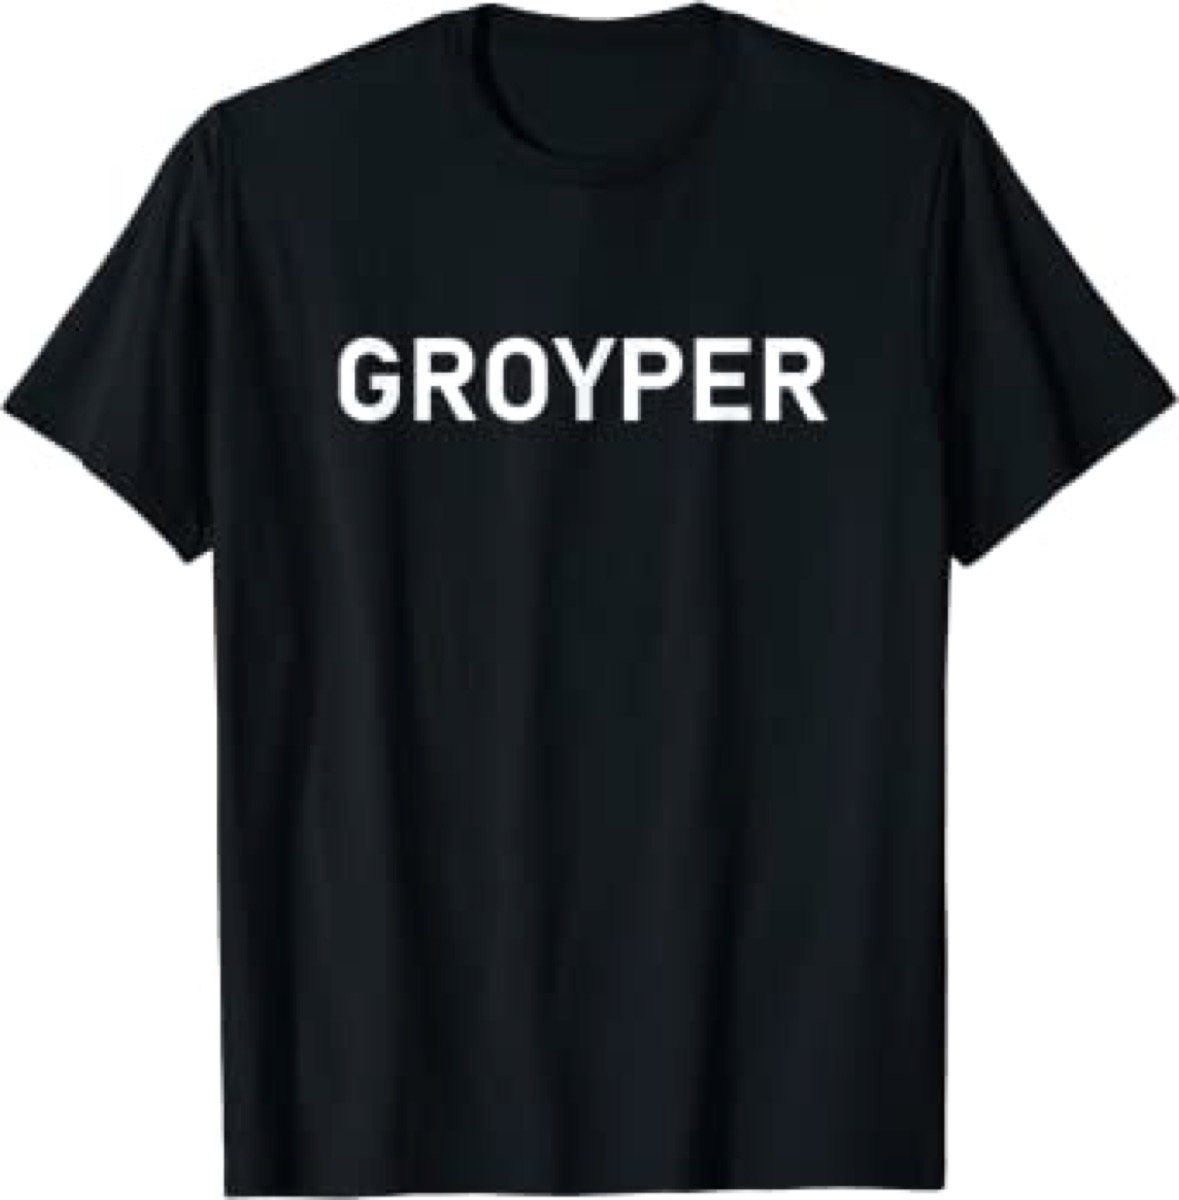 groyper t-shirt that was being sold on Amazon